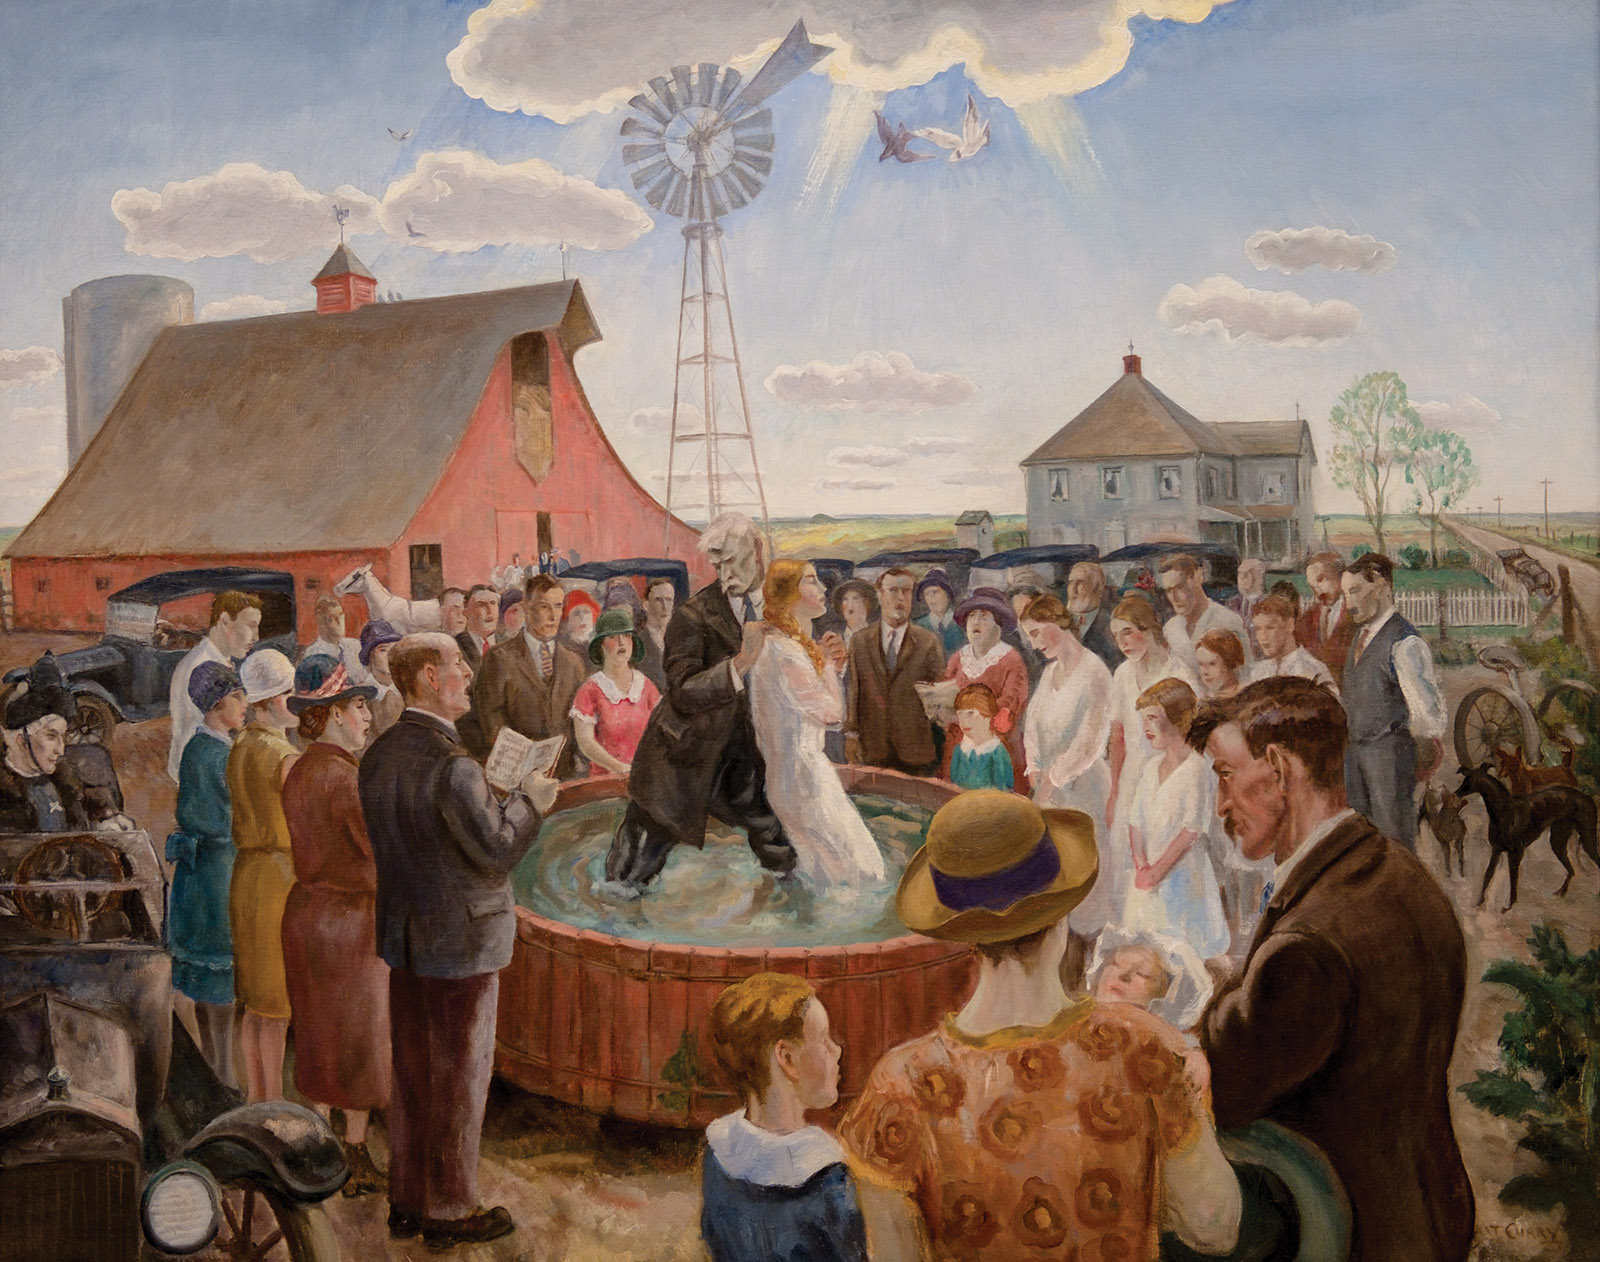 a painting of a man baptizing a woman in a wooden tub surrounded by a congregation of people on a farm